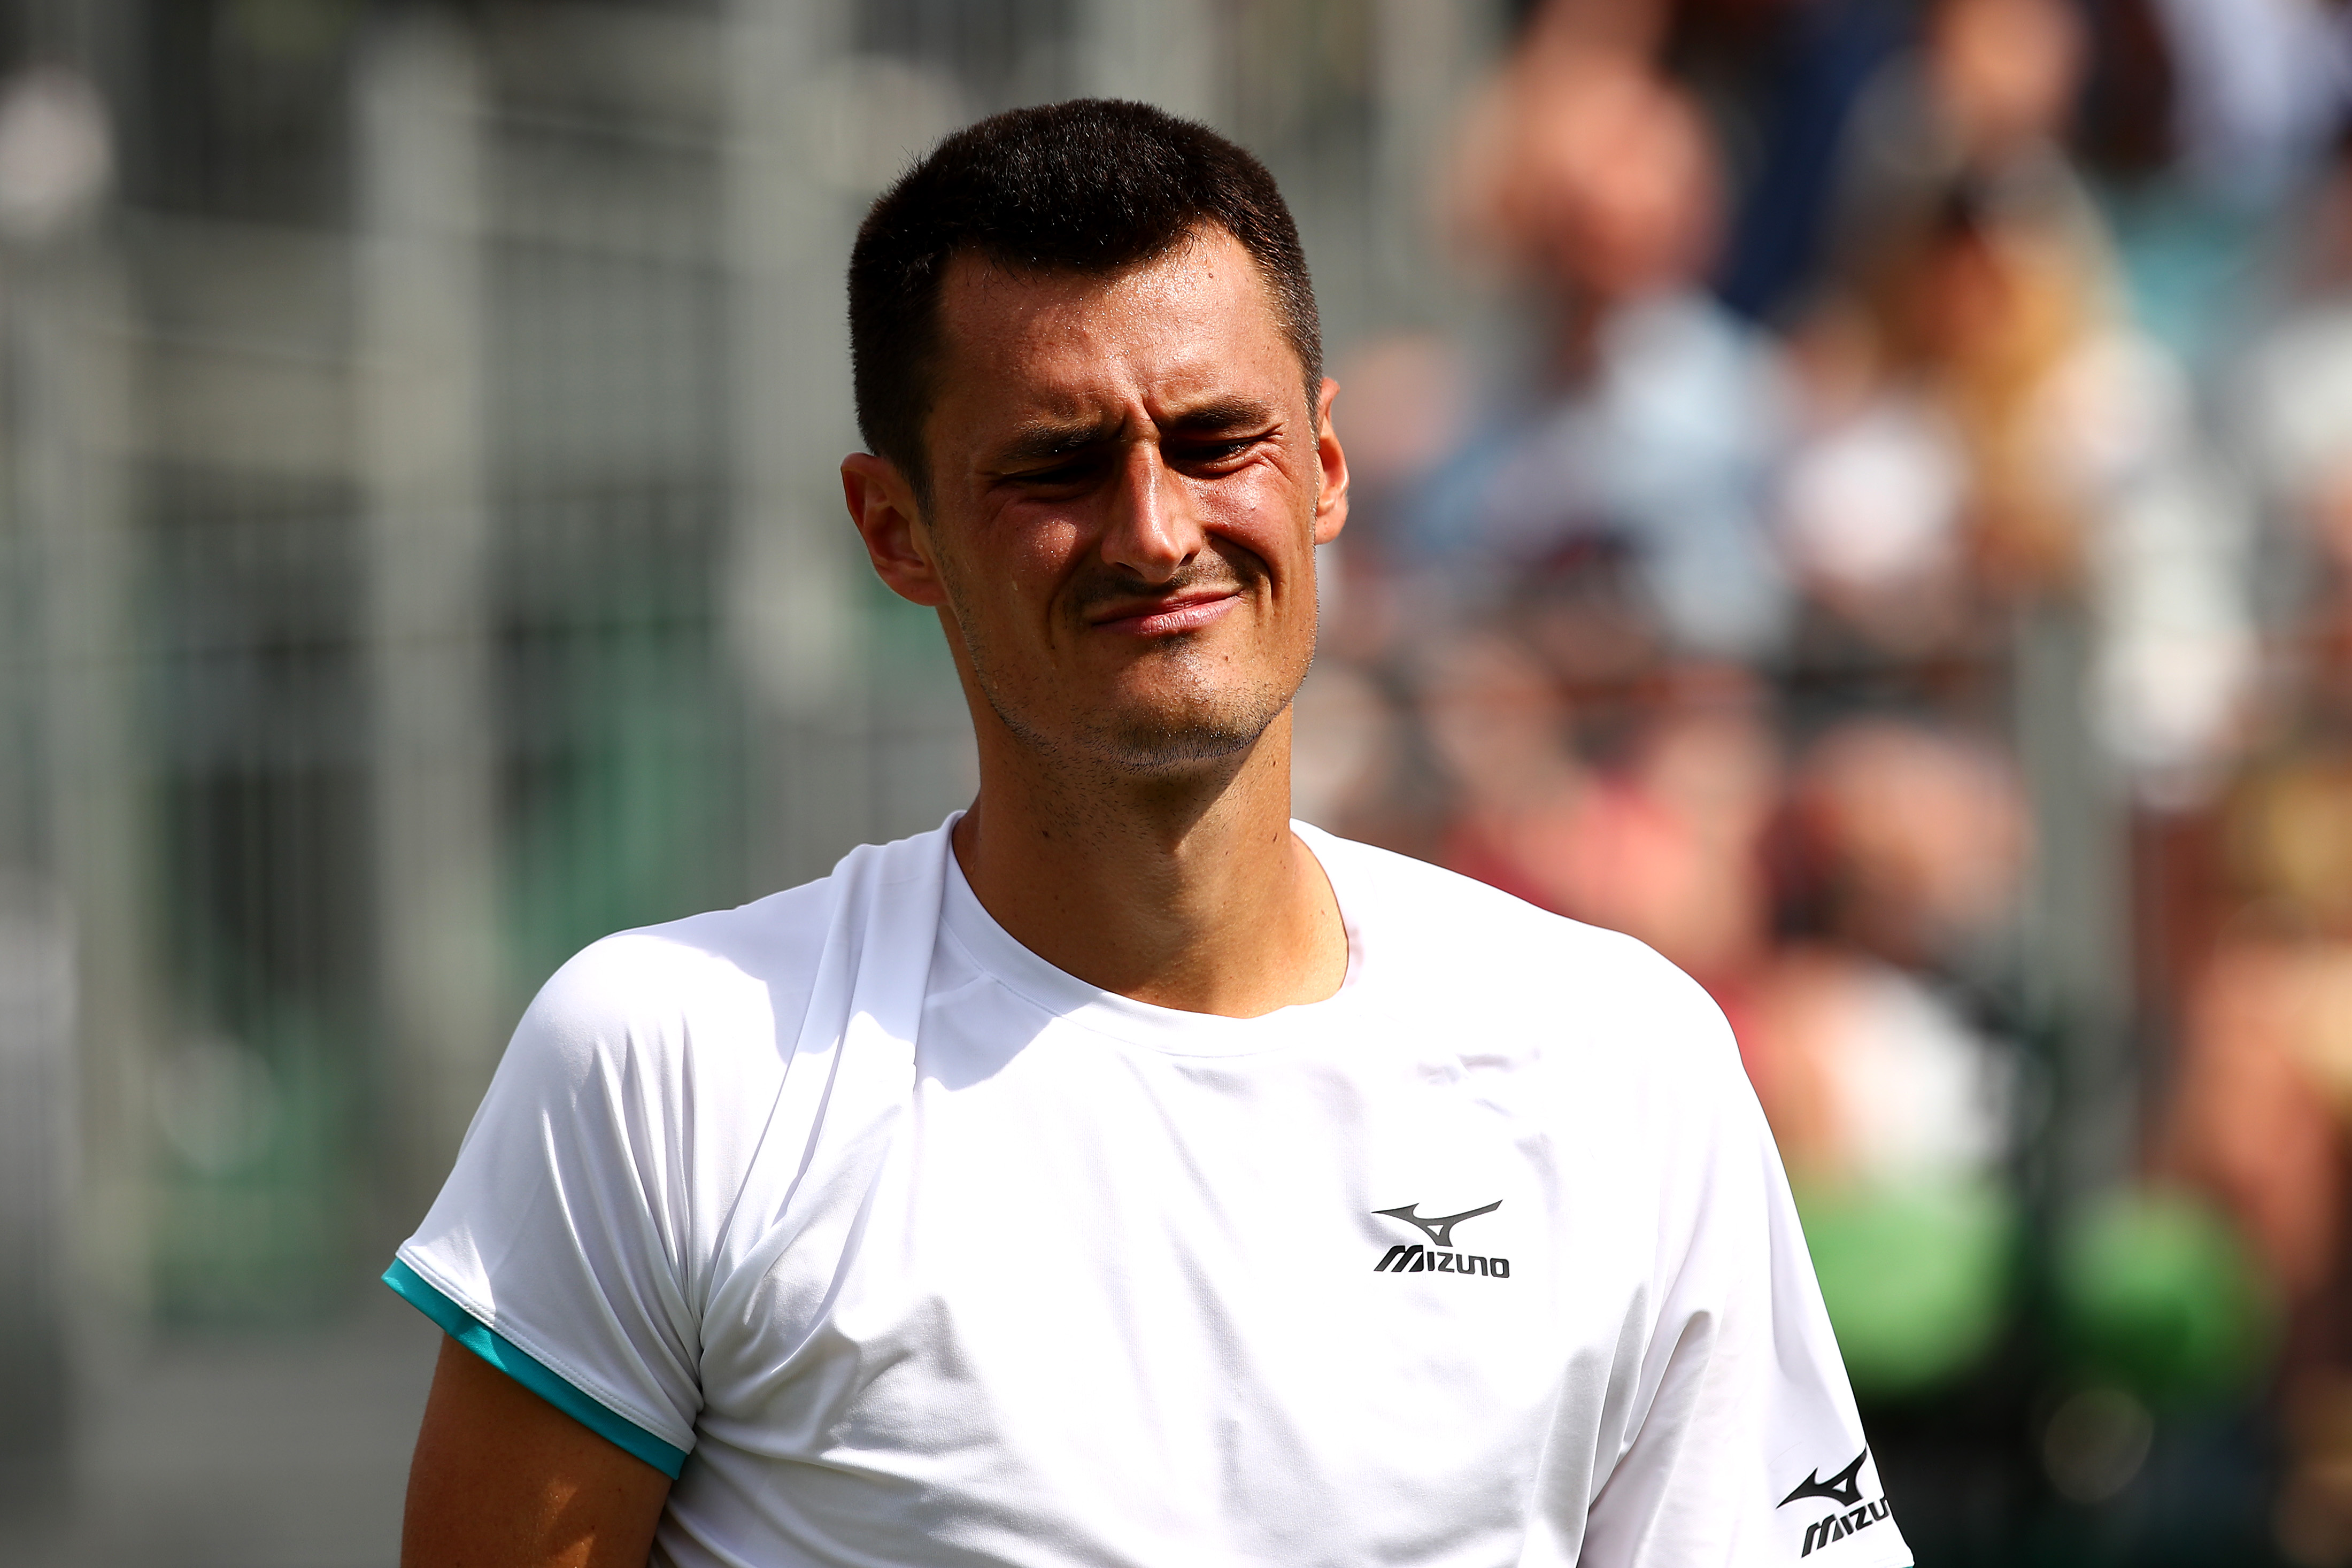 Wimbledon fines Tomic entire £45,000 prize money after 58minute loss